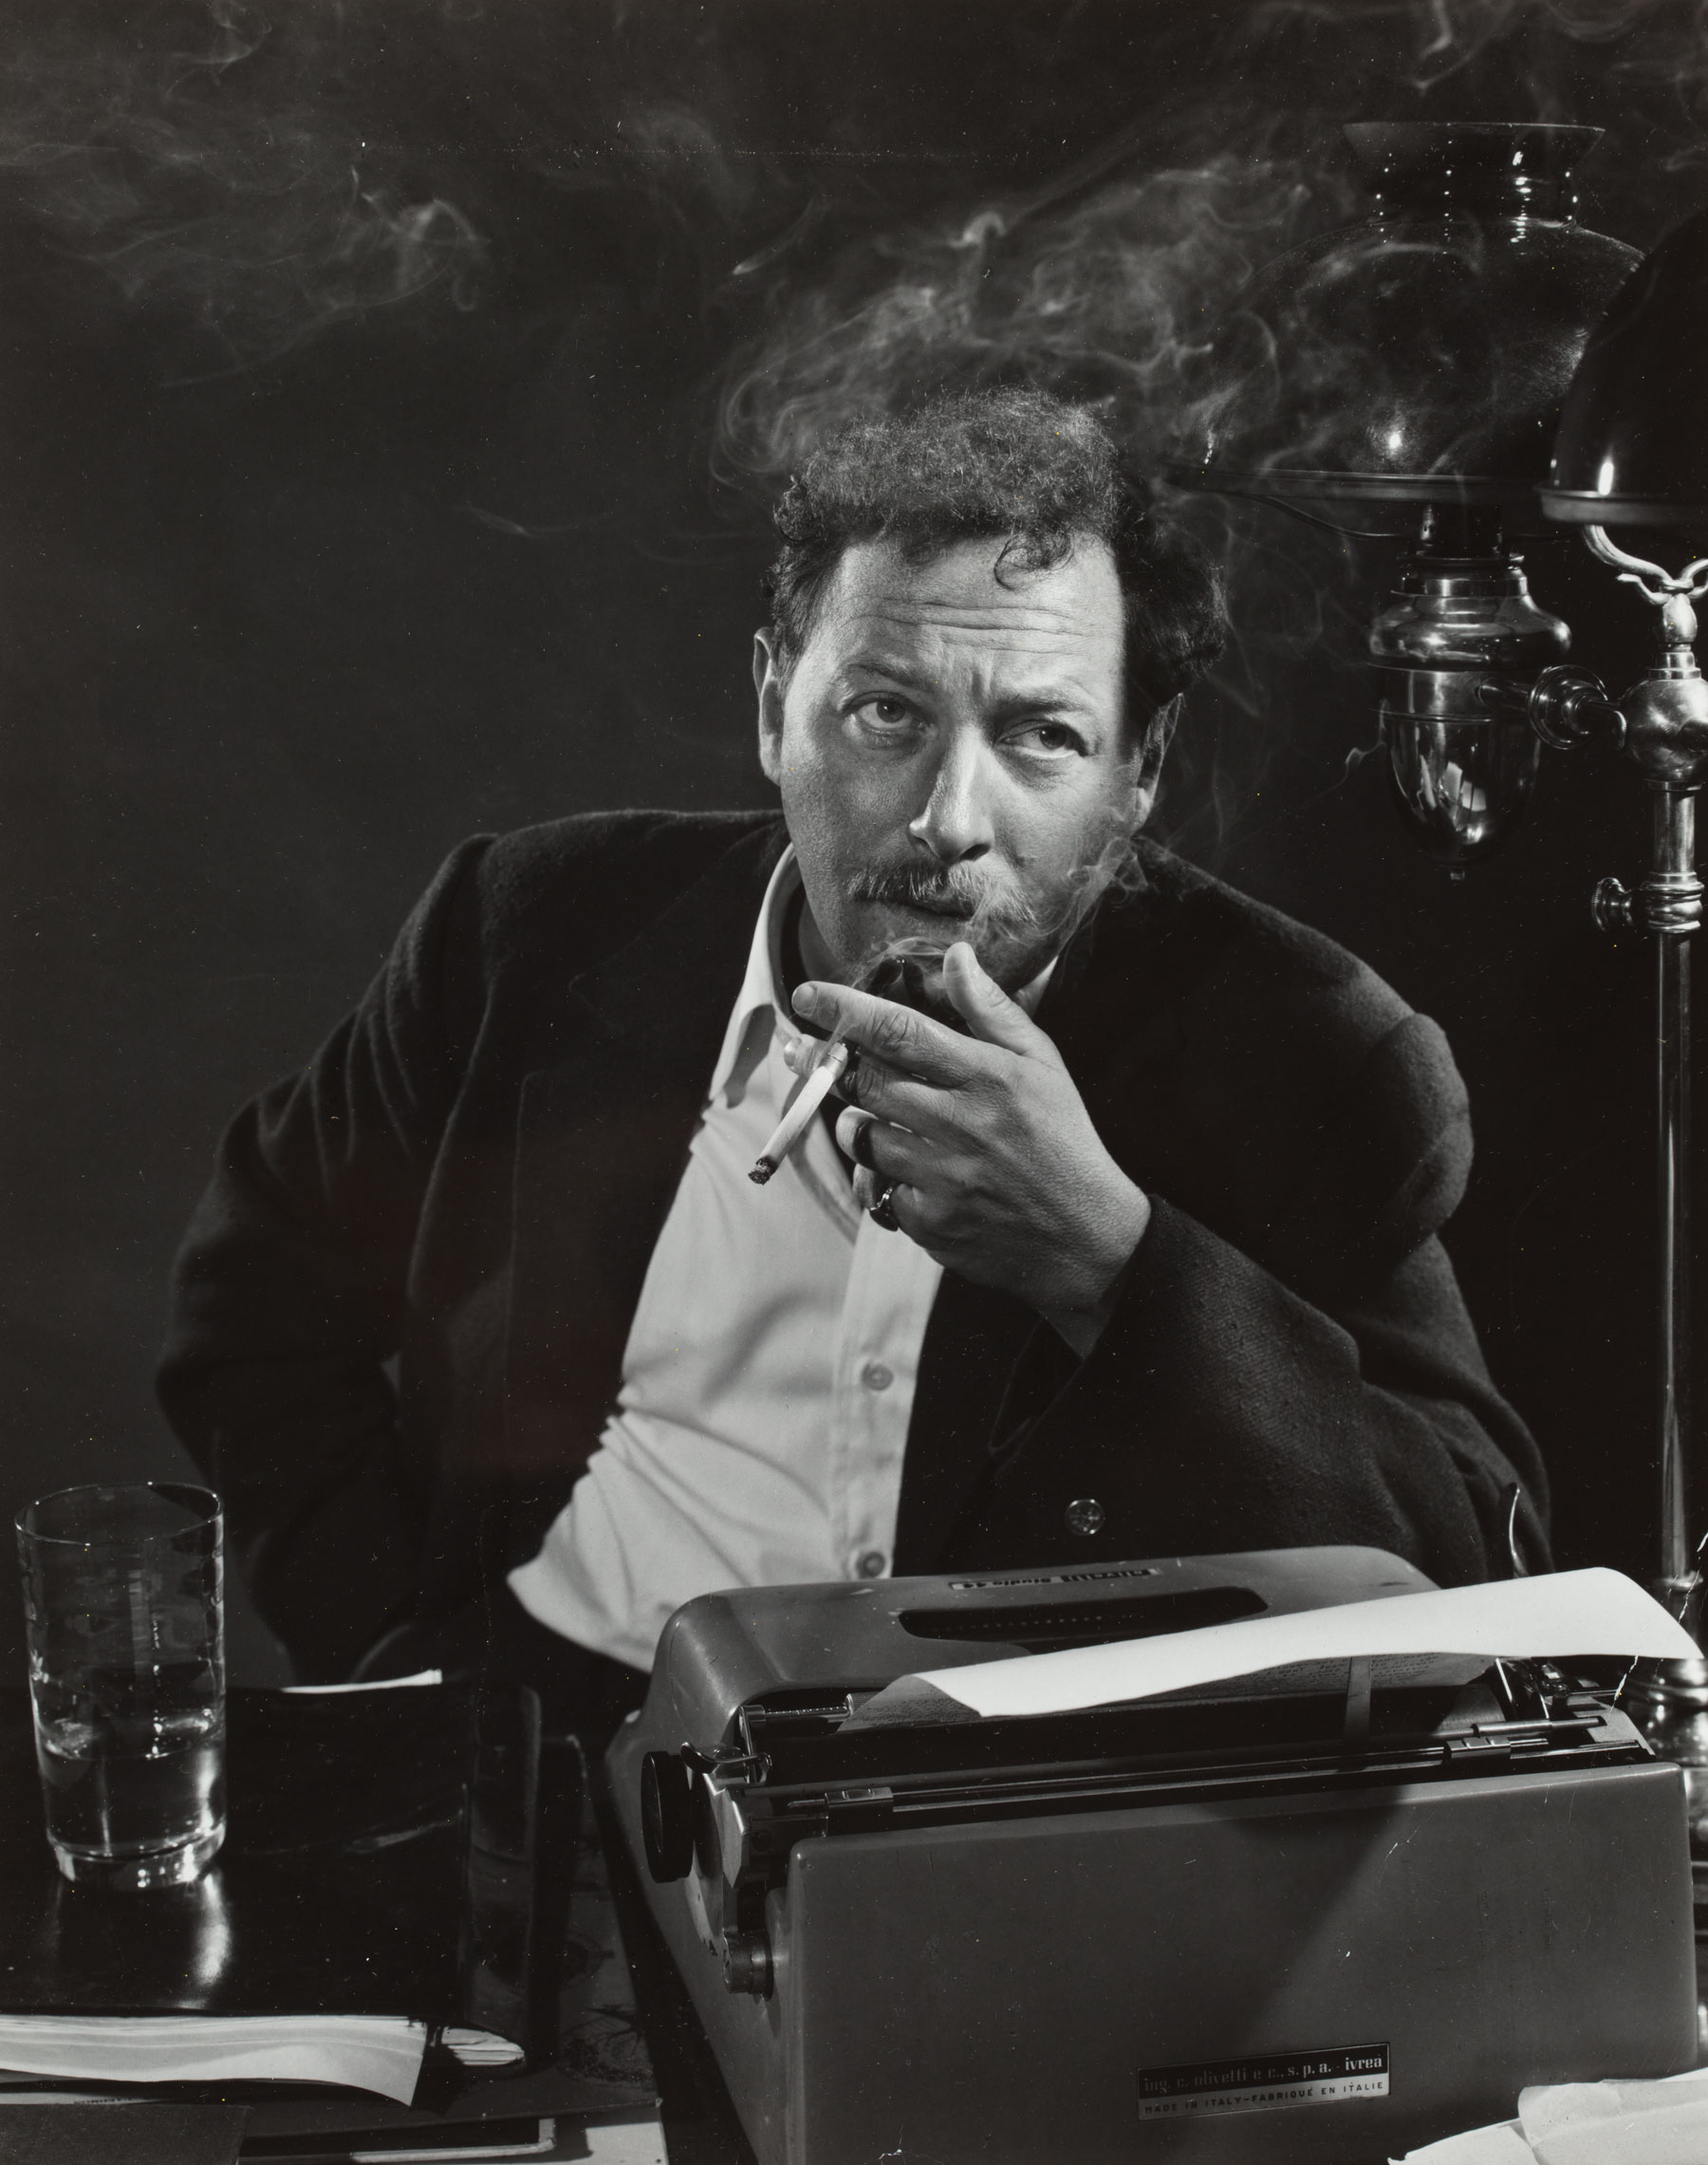 Yousuf Karsh (Amrmenian/Canadian, 1908-2002), "Tennessee Williams", 1956 negative creation date, - Image 2 of 2